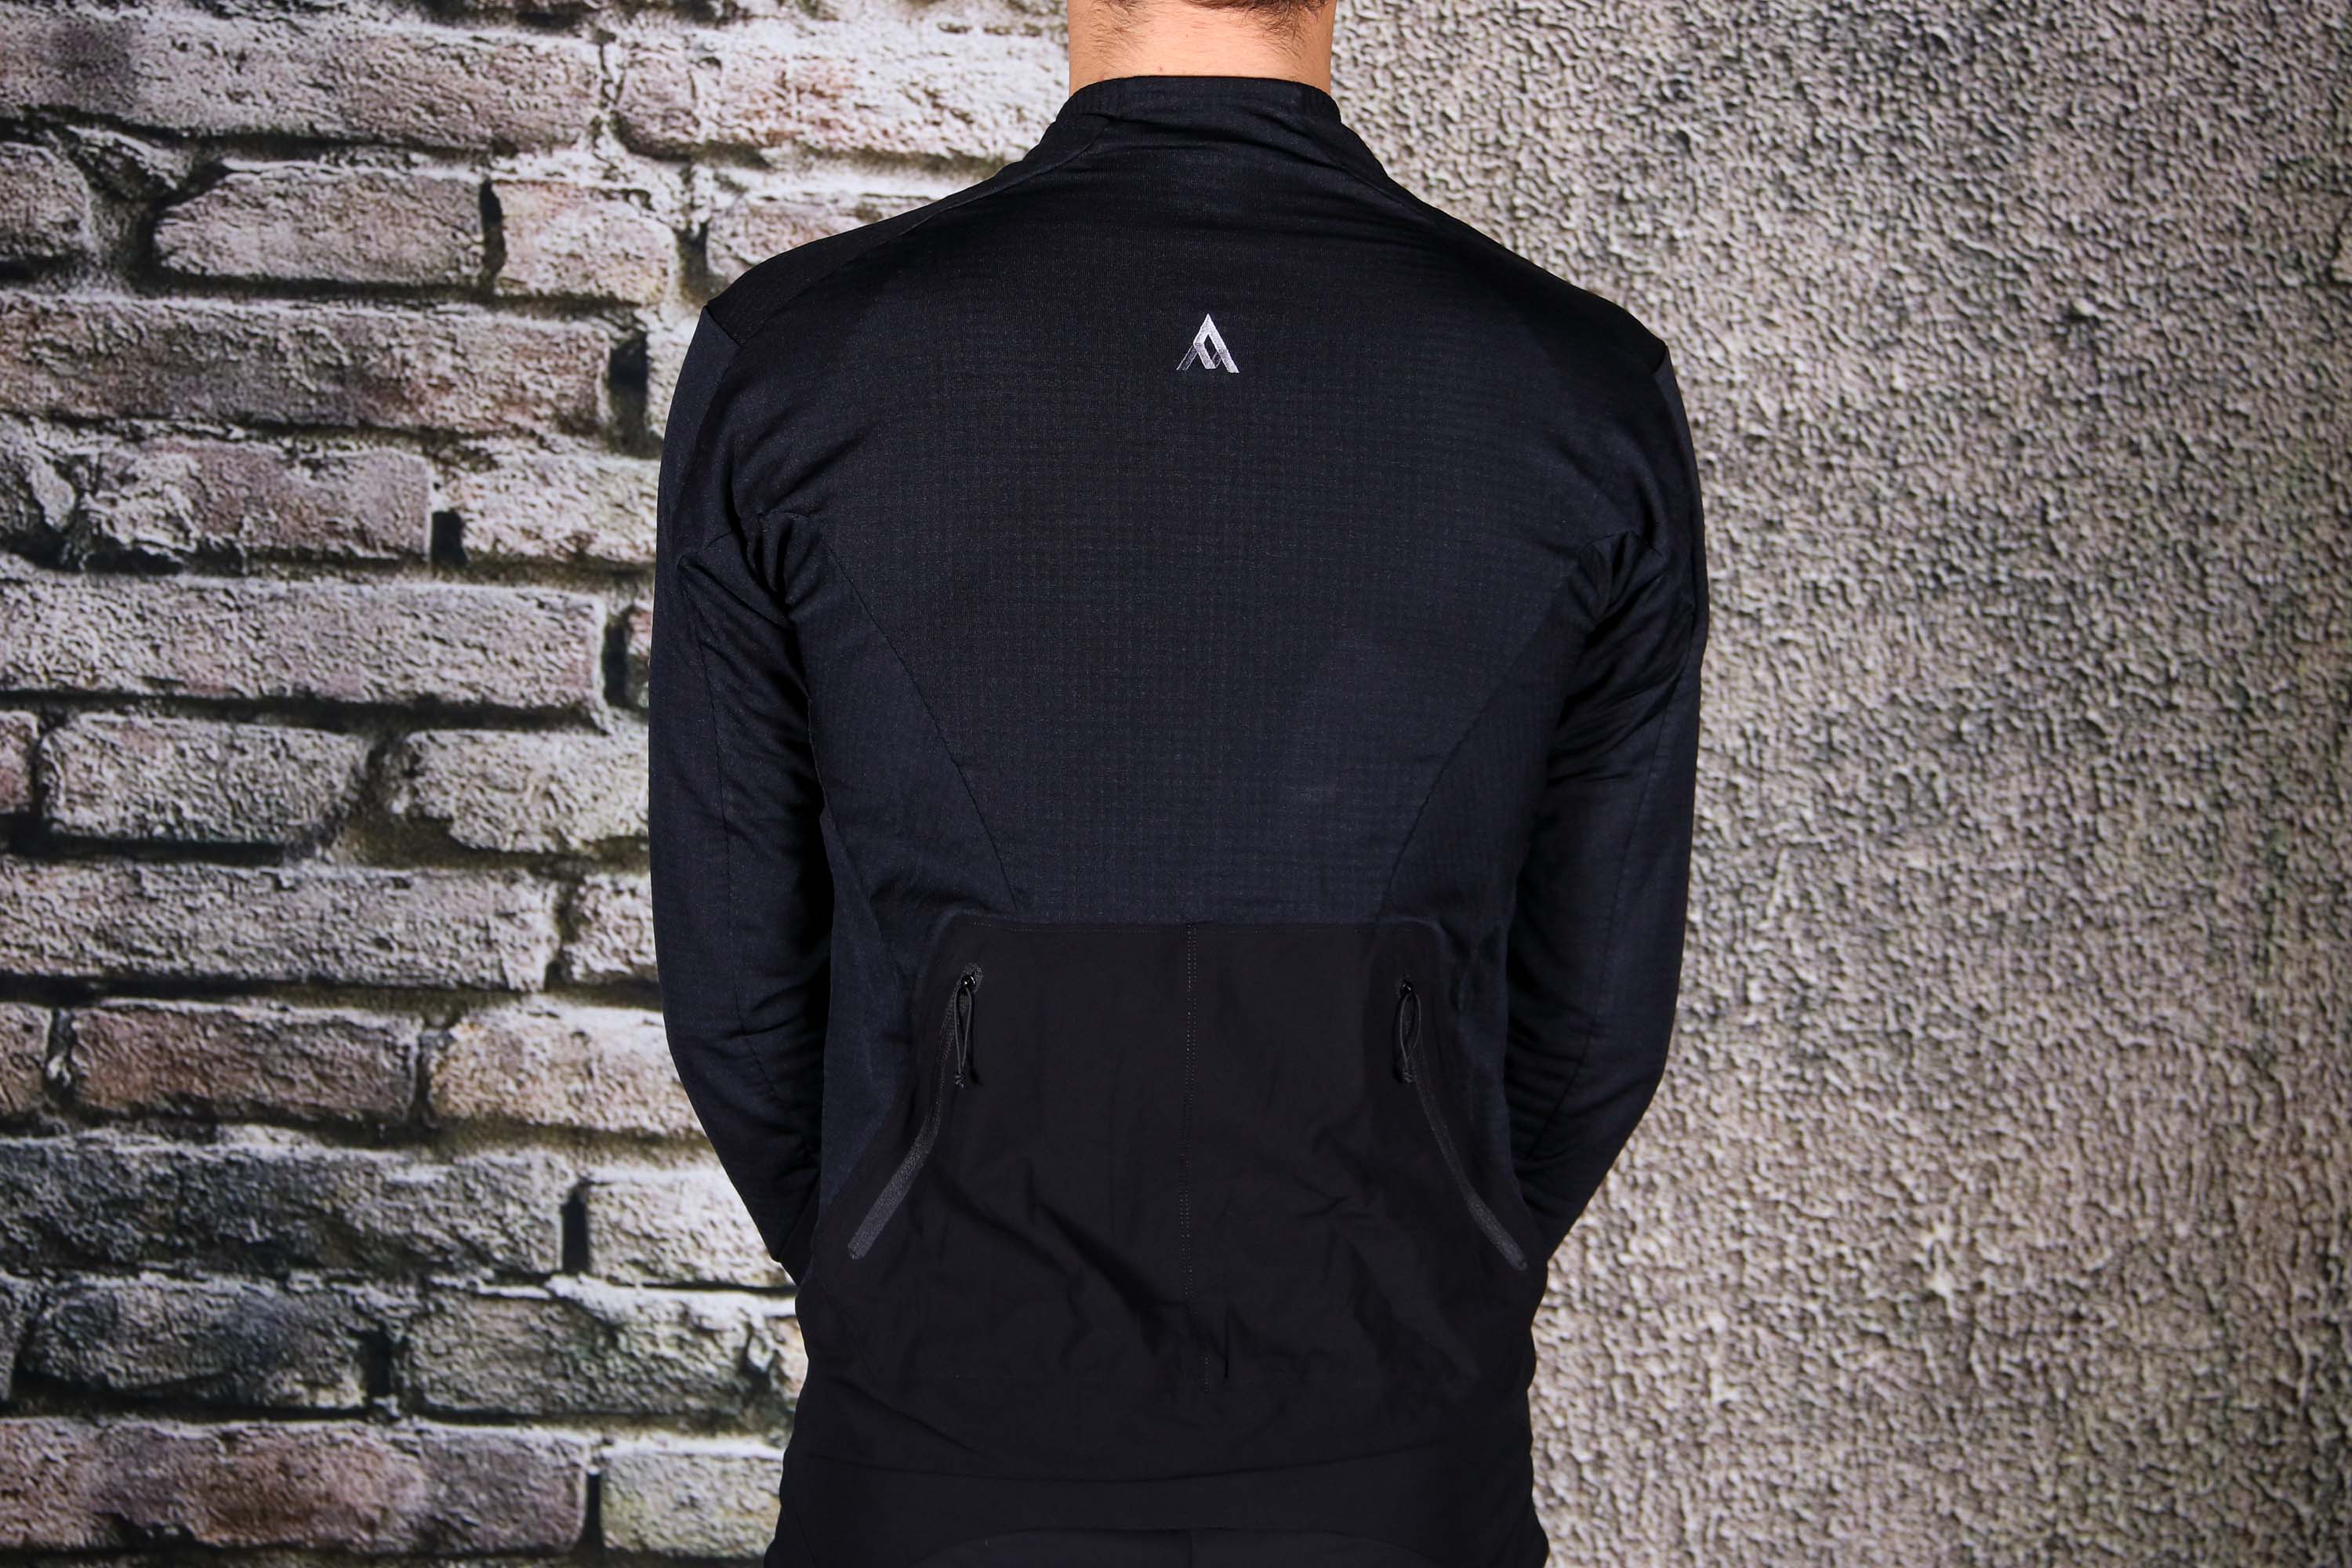 Review: 7Mesh Mission Jersey | road.cc